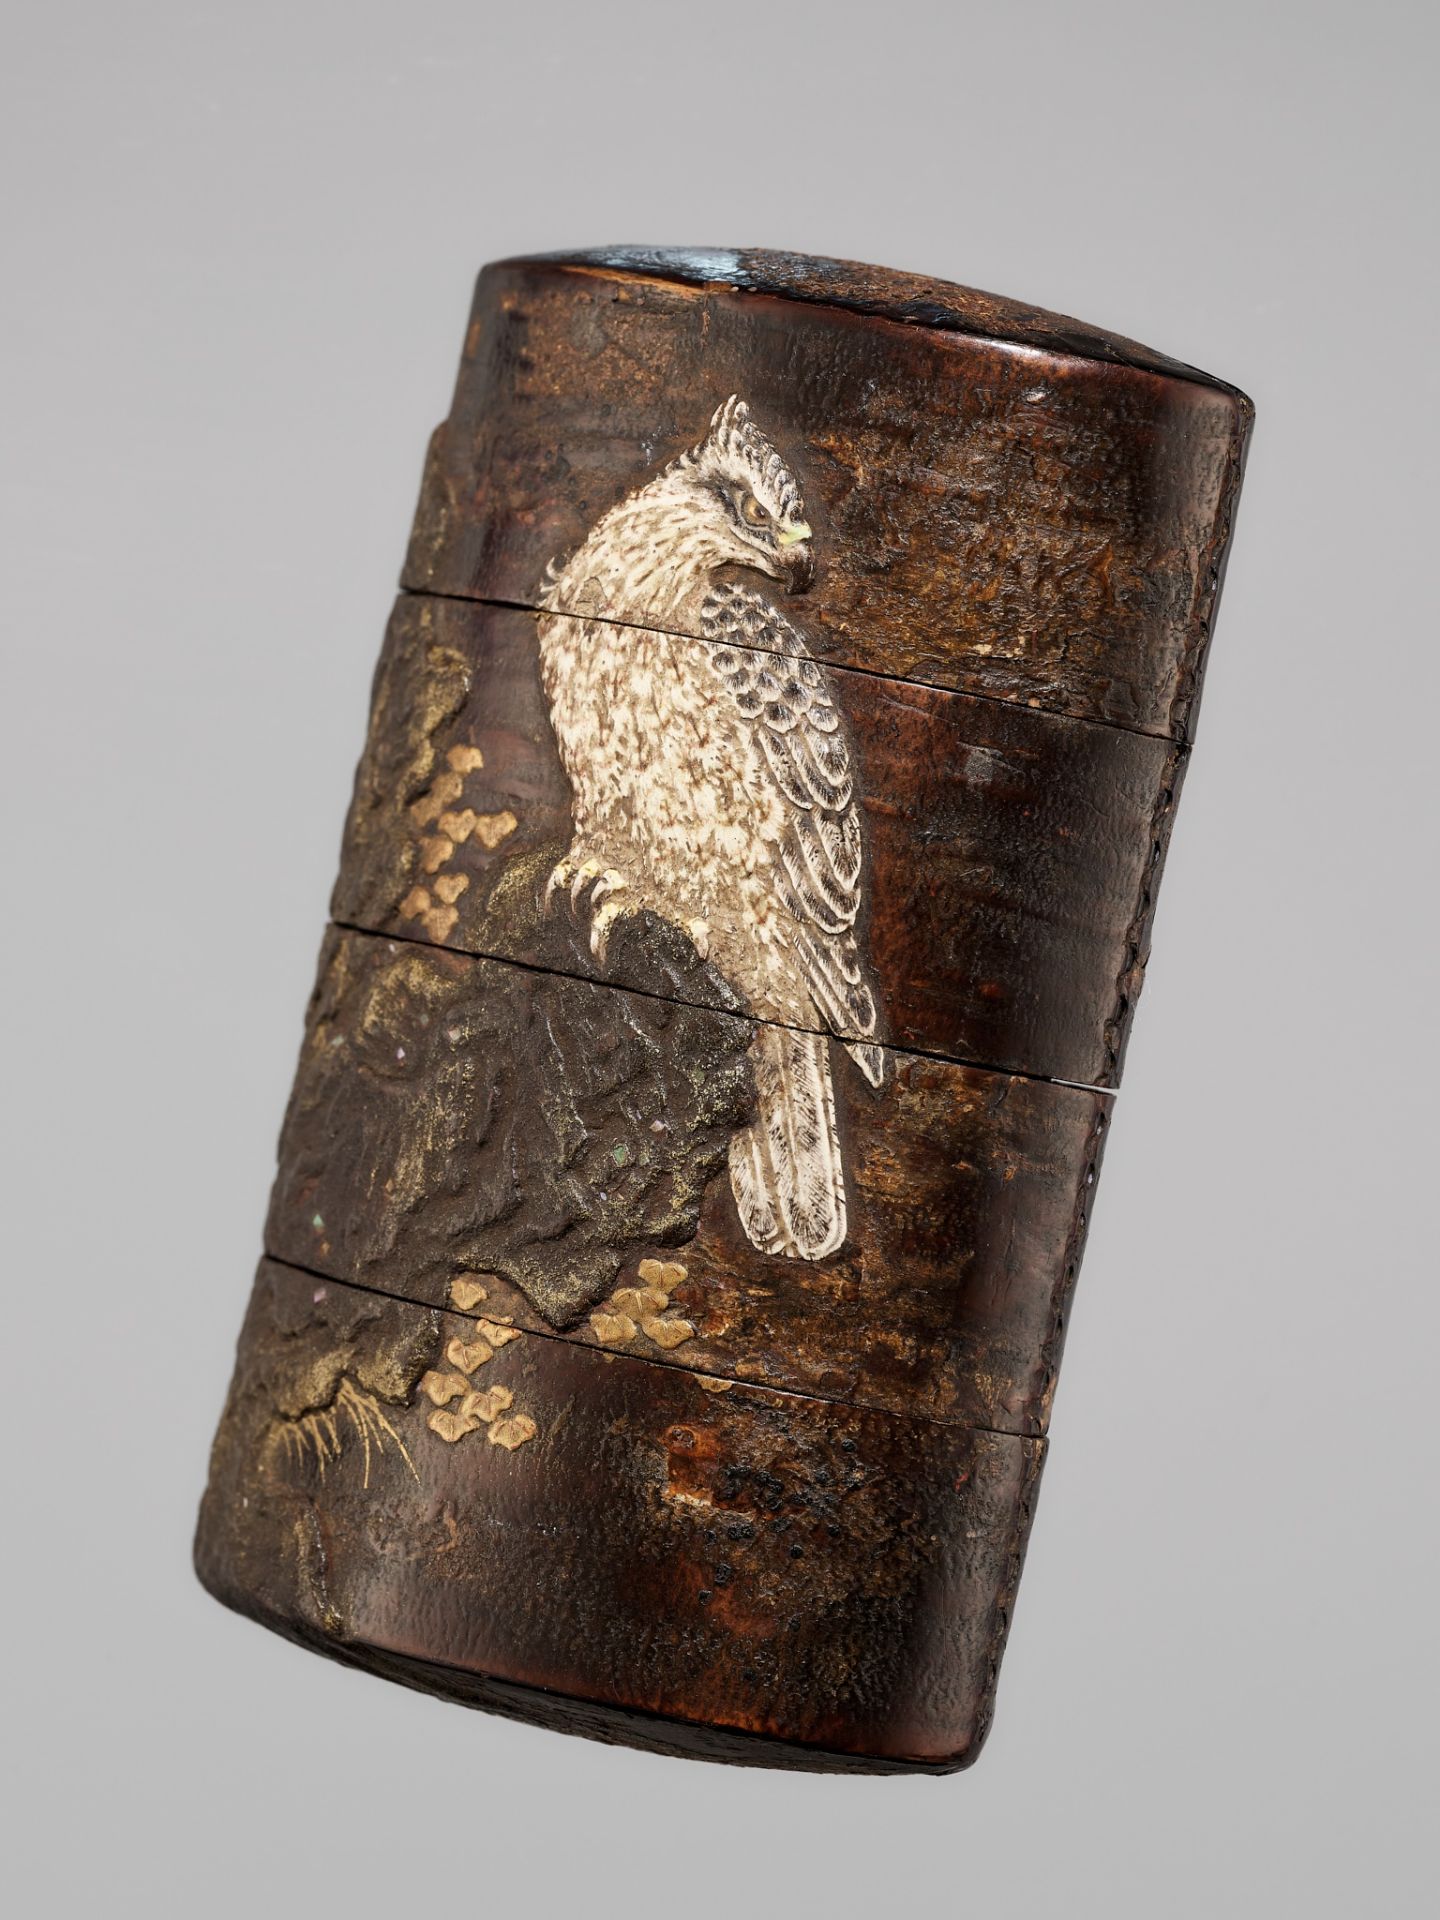 A FINE RITSUO-STYLE CHERRY-BARK AND CERAMIC-INLAID THREE-CASE LACQUER INRO WITH A HAWK AND SPARROW